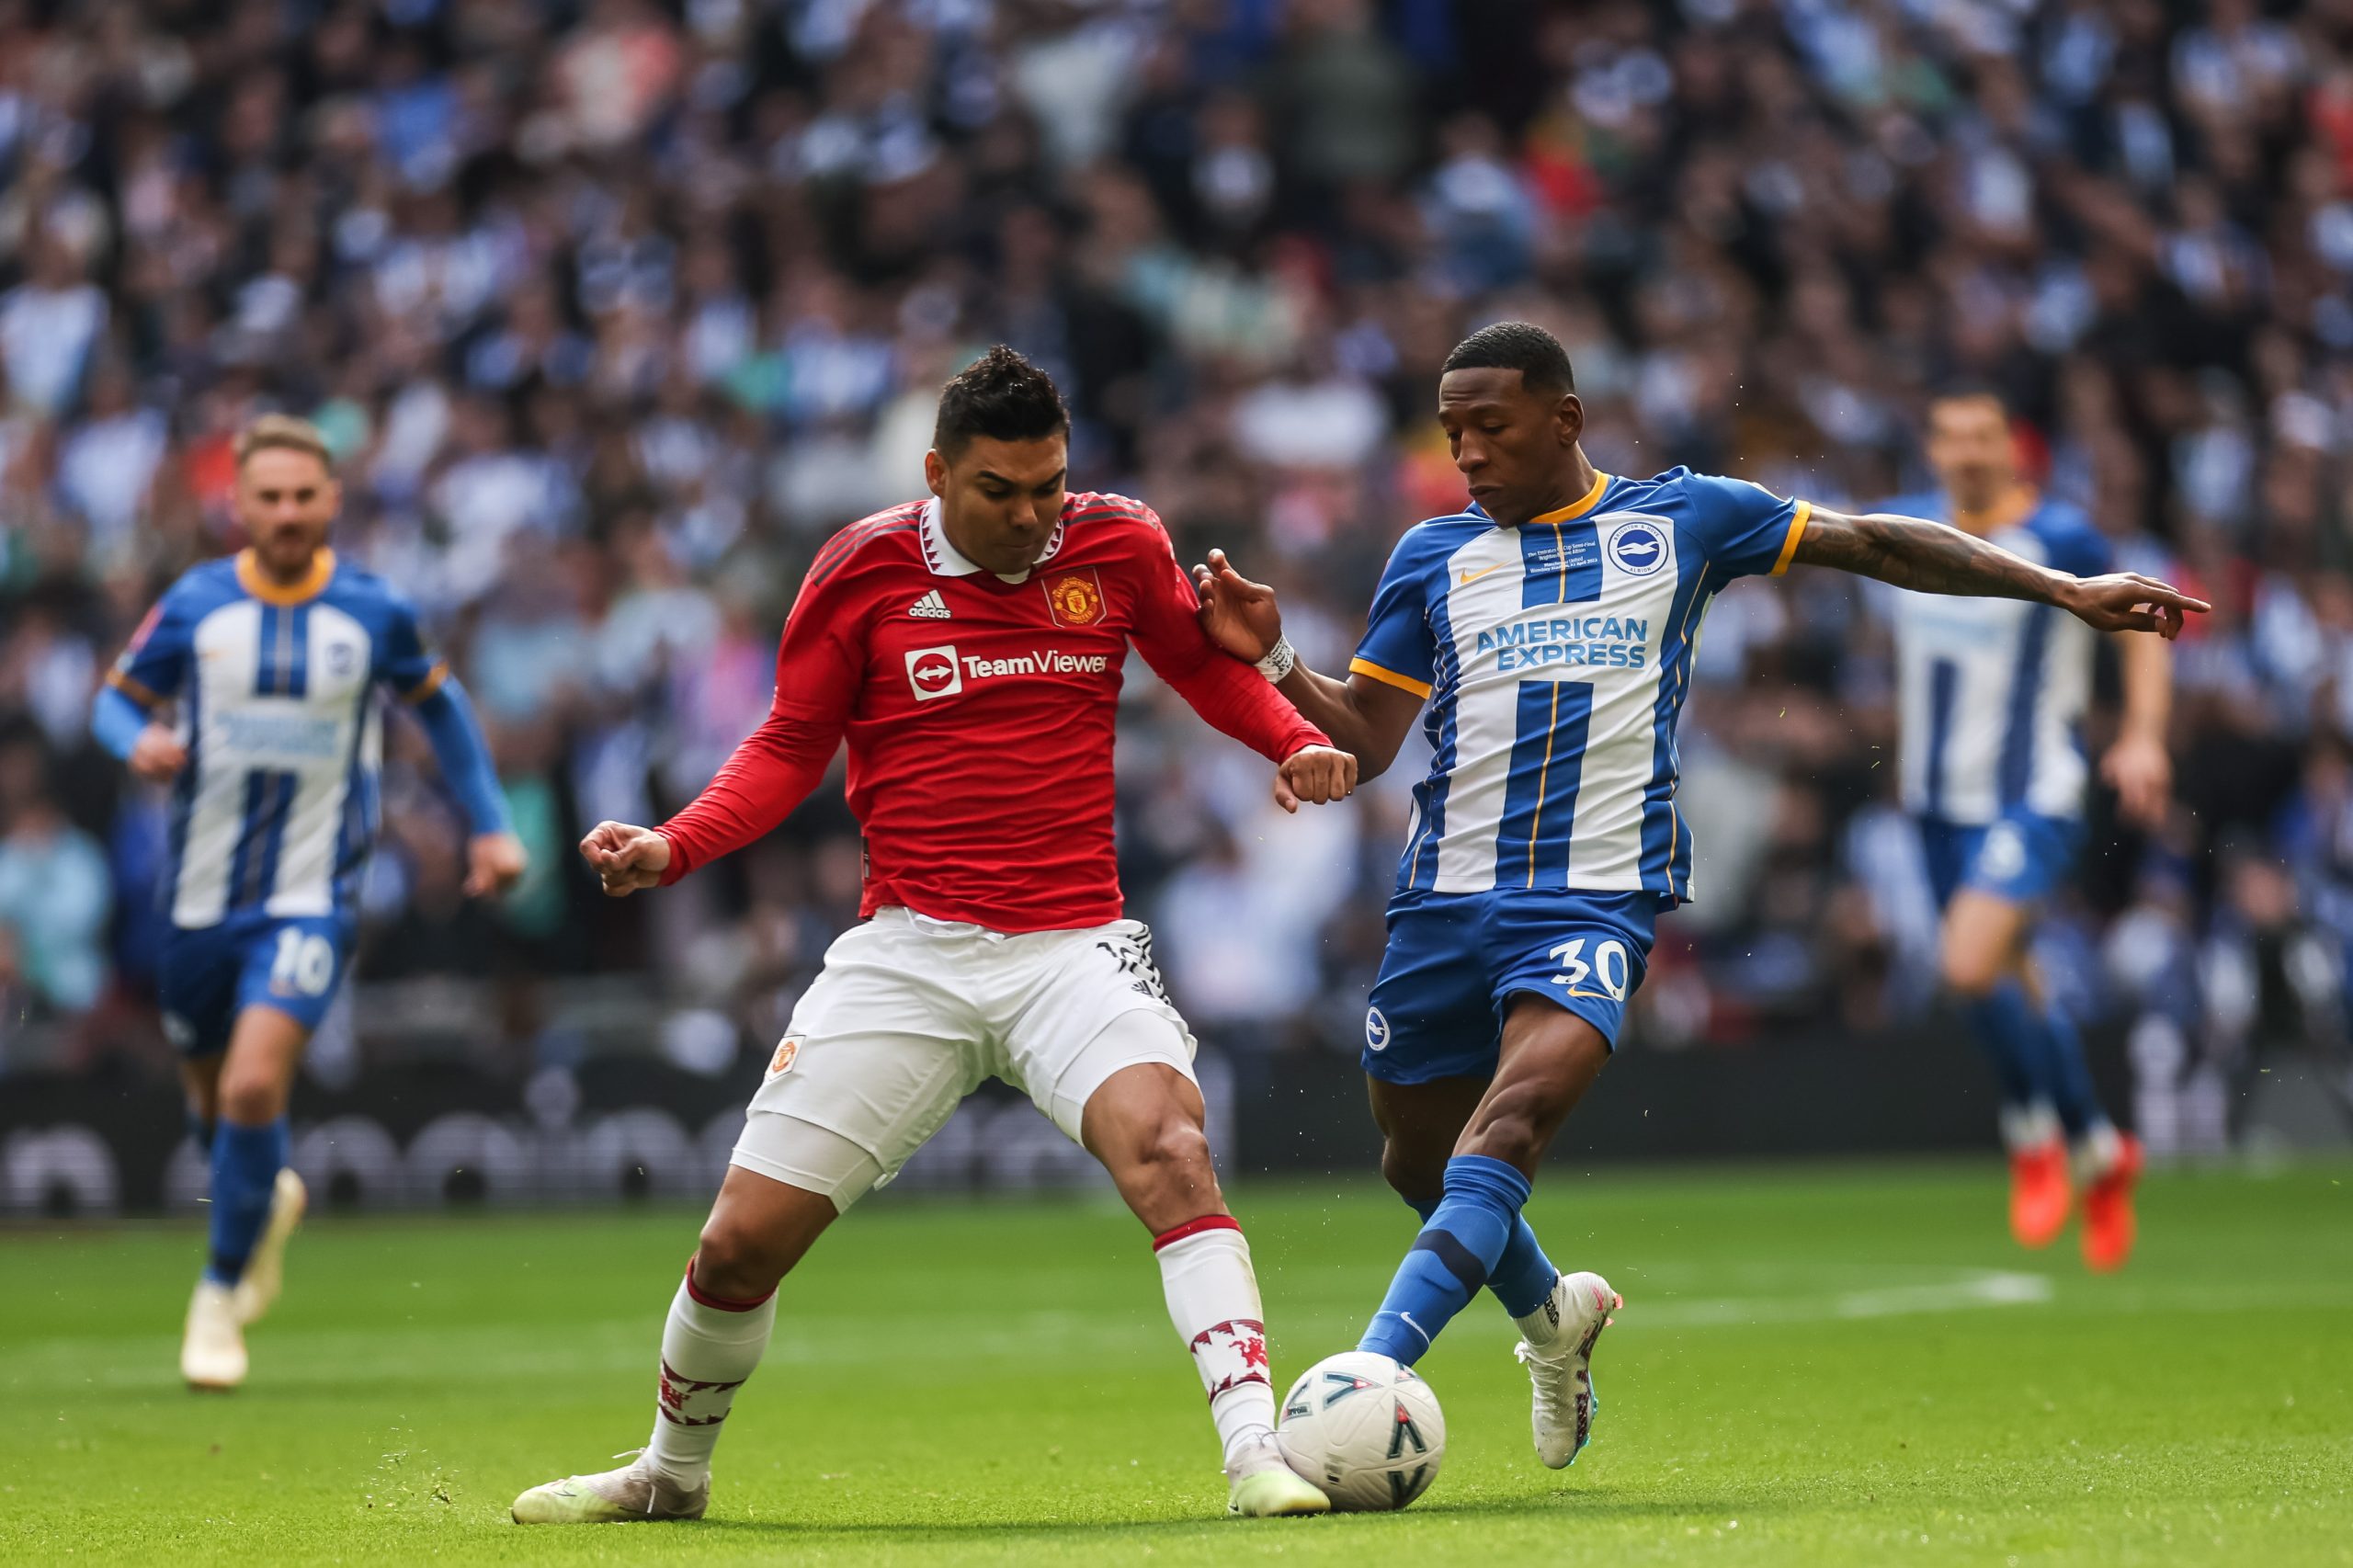 epa10587941 Casemiro of Manchester United FC (L) and Pervis Estupinan of Brighton & Hove Albion FC (R) in action during the FA Cup semi-final match between Brighton and Hove Albion and Manchester United in London, Britain, 23 April 2023.  EPA/ISABEL INFANTES EDITORIAL USE ONLY. No use with unauthorized audio, video, data, fixture lists, club/league logos or 'live' services. Online in-match use limited to 120 images, no video emulation. No use in betting, games or single club/league/player publications